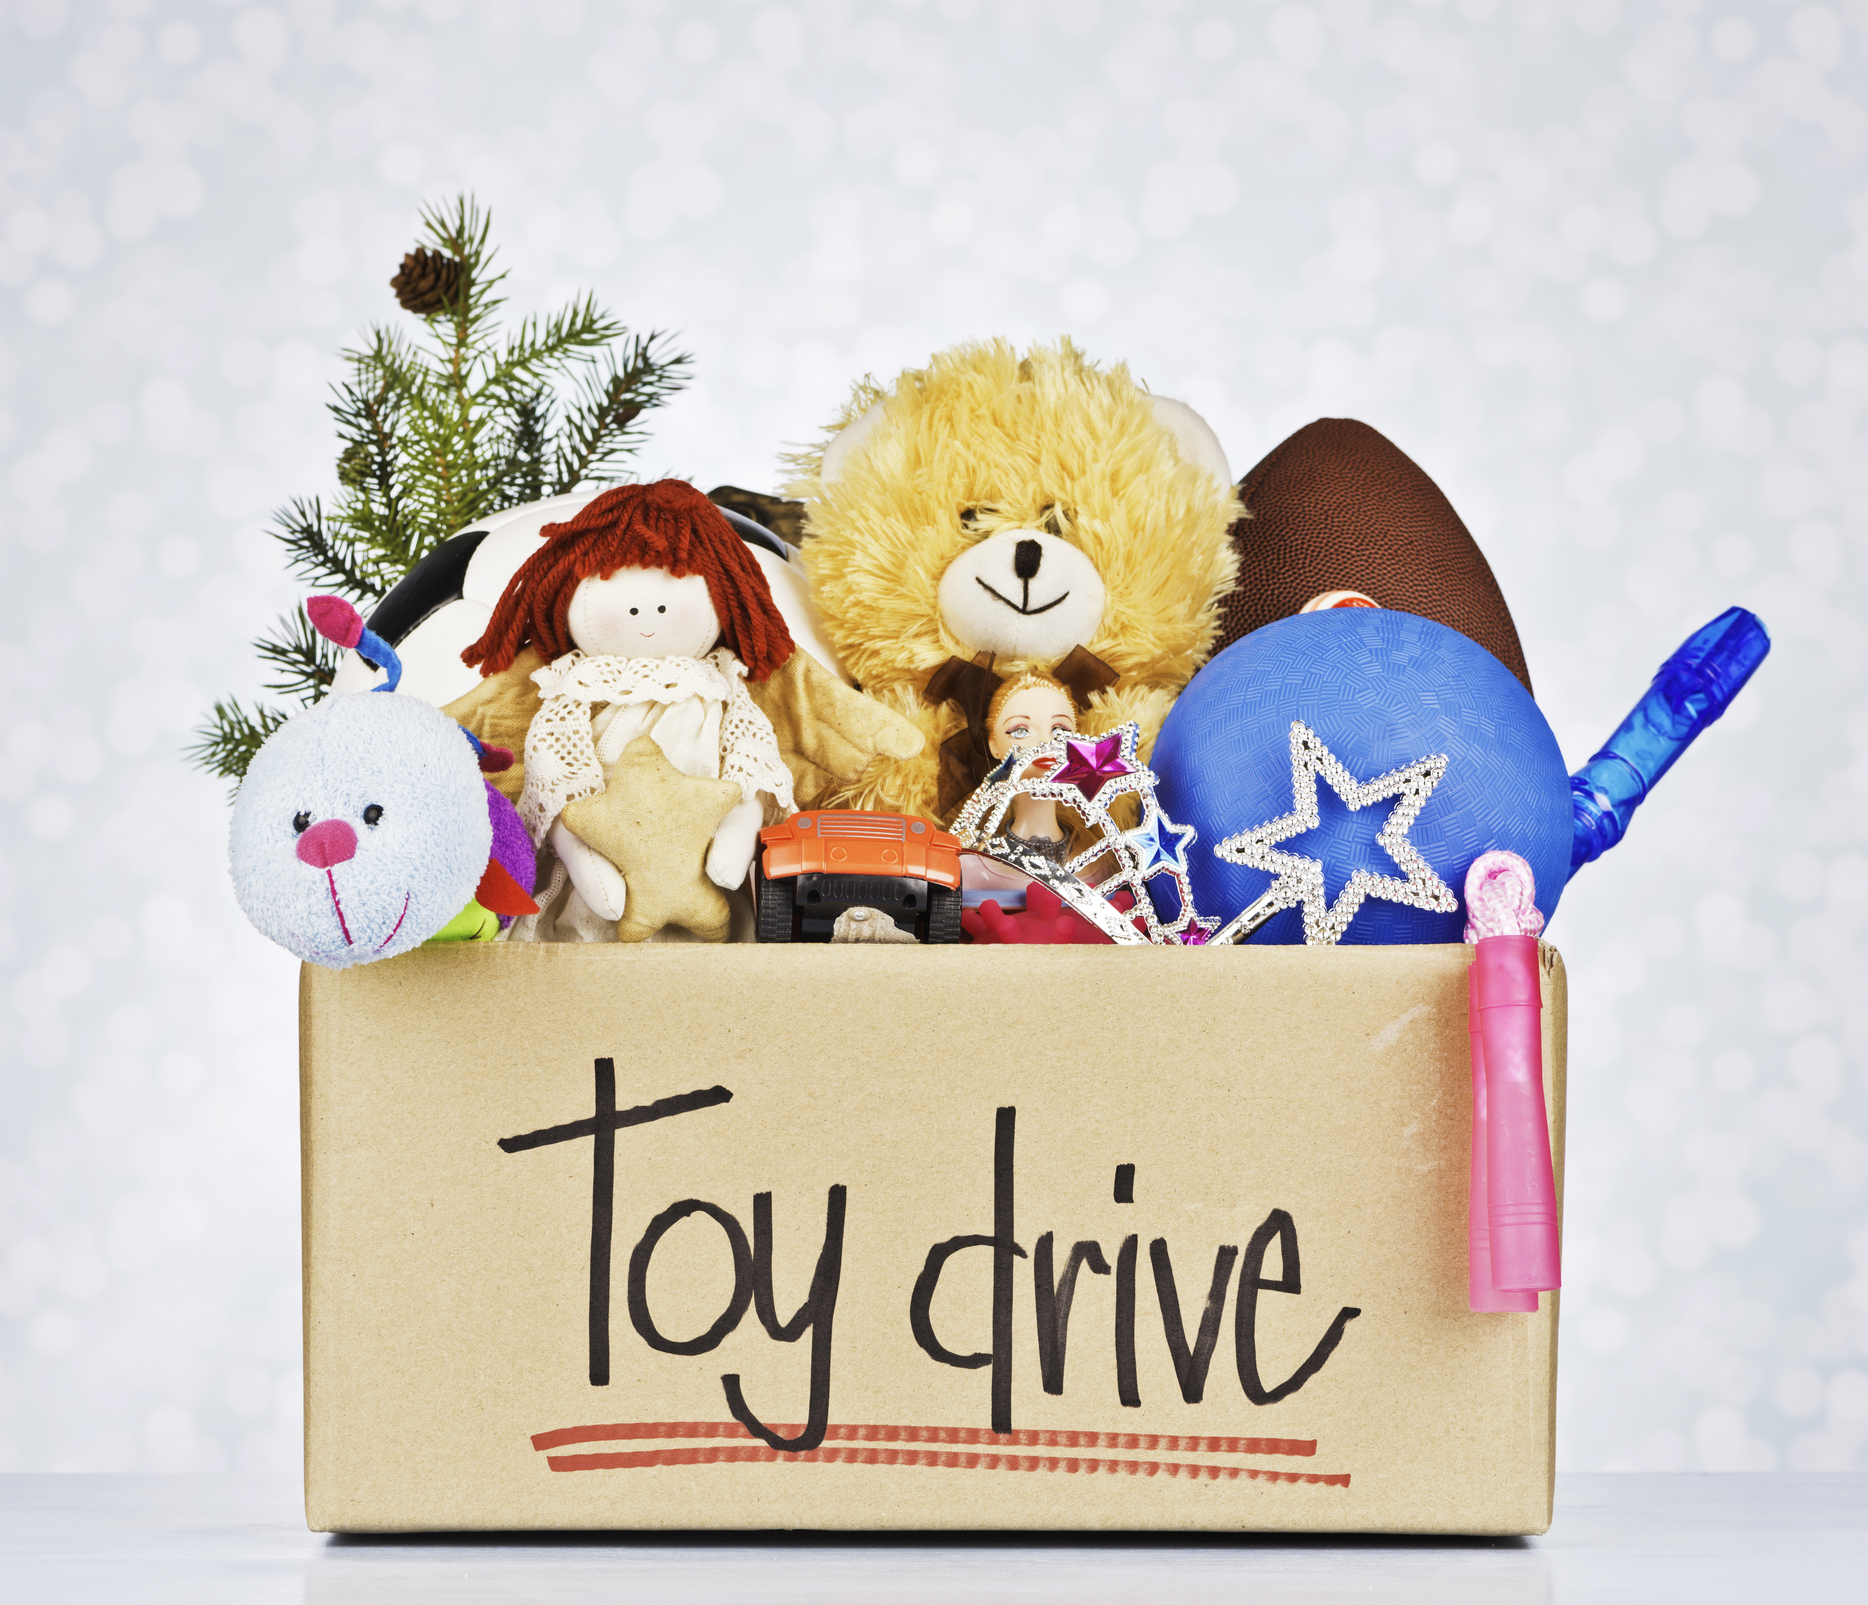 Toy drive for Christmas